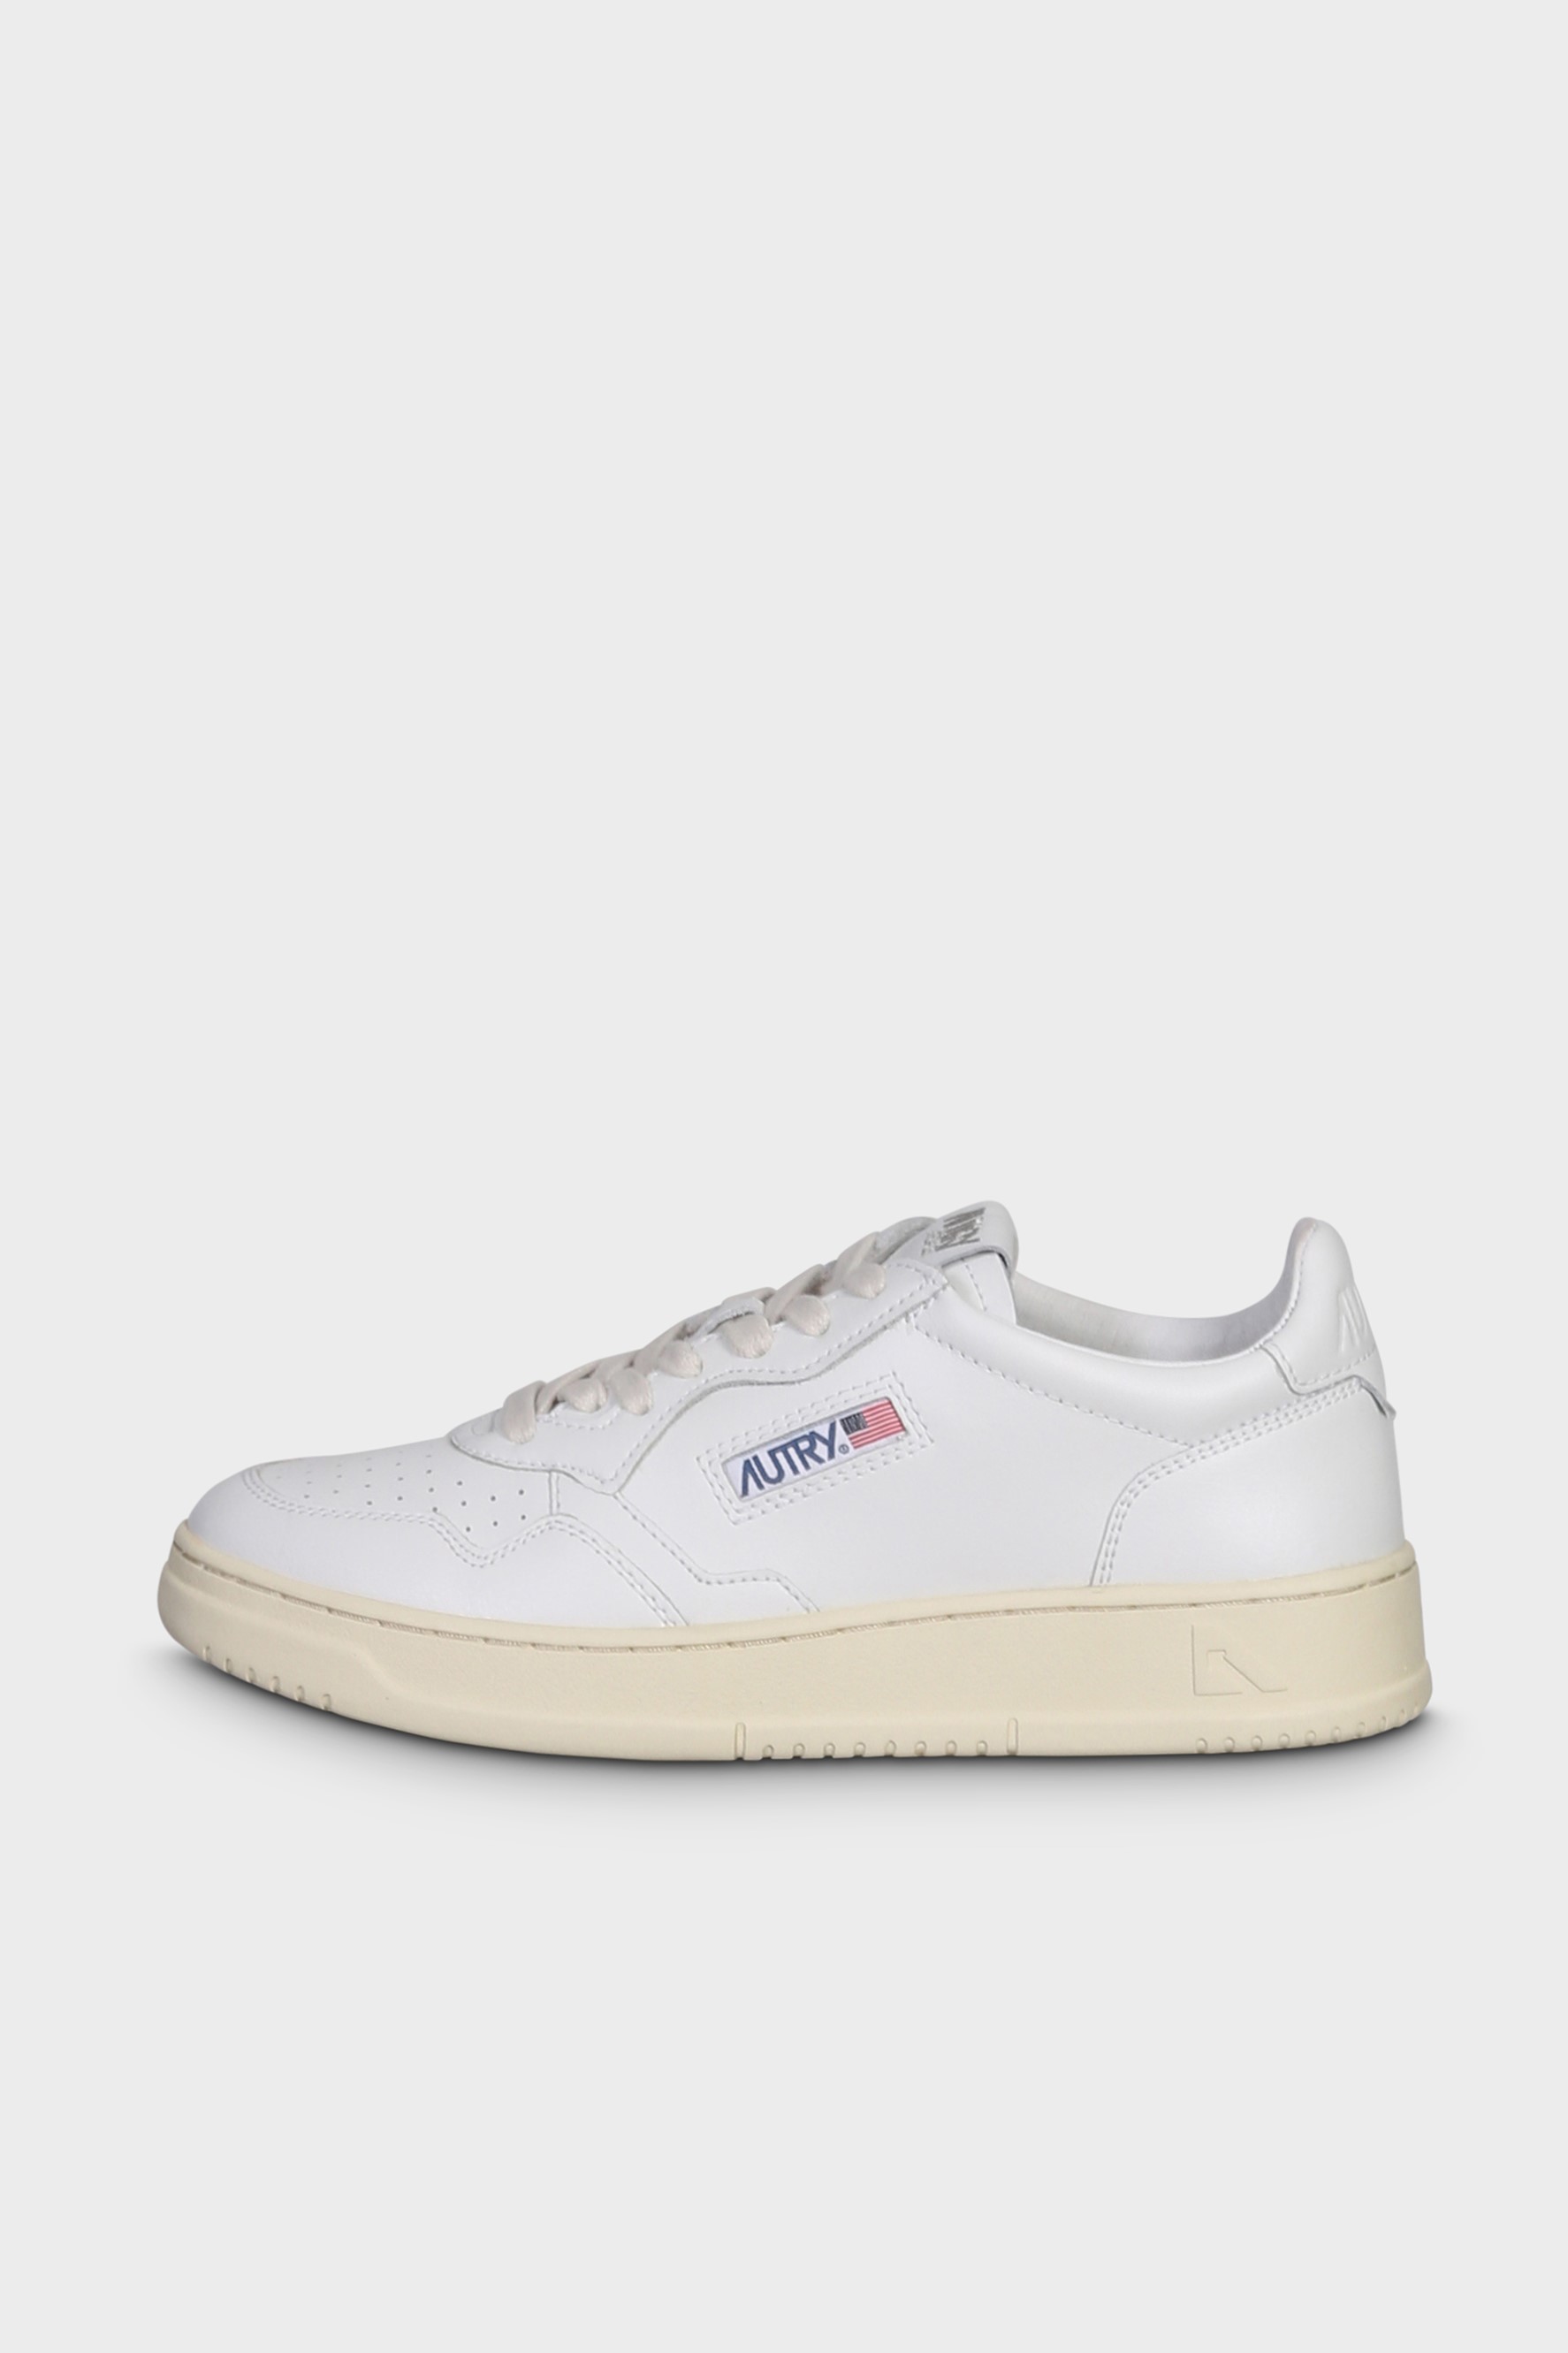 AUTRY ACTION SHOES Medalist Low Sneaker in White/White 35